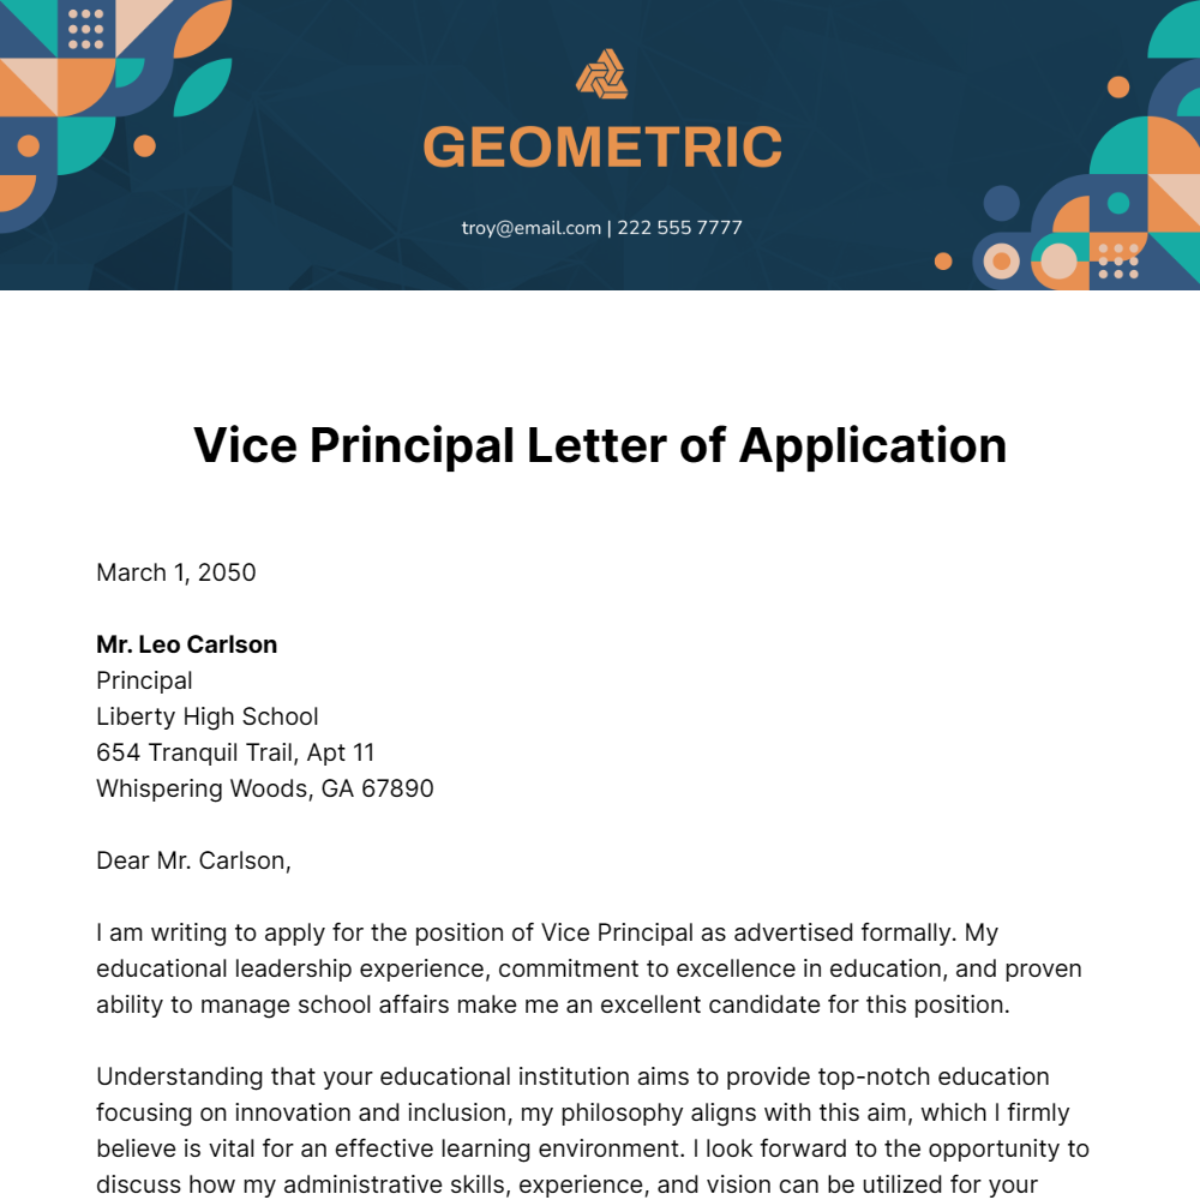 Vice Principal Letter of Application Template